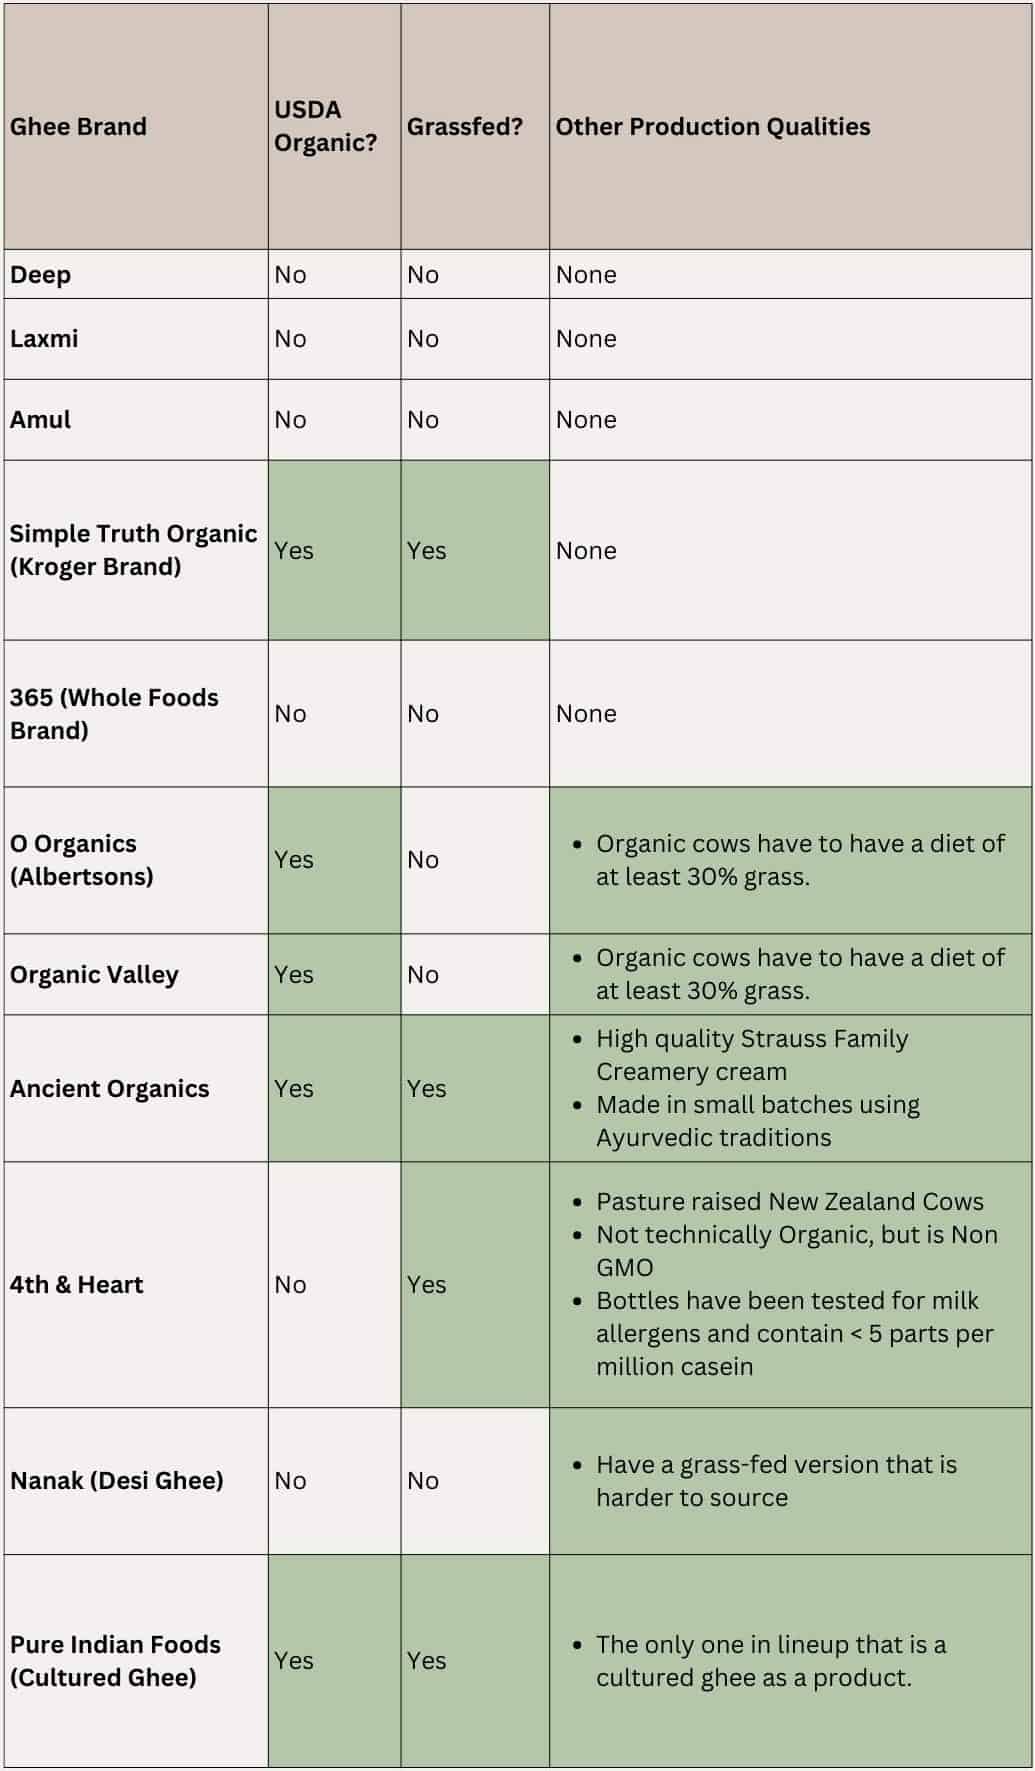 A comparison table of various ghee brands based on USDA Organic certification, grassfed status, and other production qualities. Each row represents a different brand. Deep: USDA Organic: No, Grassfed: No. Laxmi: USDA Organic: No, Grassfed: No. Amul: USDA Organic: No, Grassfed: No. Simple Truth Organic (Kroger Brand): USDA Organic: Yes, Grassfed: Yes. 365 (Whole Foods Brand): USDA Organic: No, Grassfed: No. O Organics (Albertsons): USDA Organic: Yes, Grassfed: No. Doesn't have grass fed on label but Organic cows have to have a diet of at least 30% grass. Organic Valley: USDA Organic: Yes, Grassfed: No. Doesn't say grass fed on the label but all of their cows are pasture raised and because of the Organic classification, the diet of cows is at least 30% grass. Ancient Organics: USDA Organic: Yes, Grassfed: Yes. Source cream exclusively from Strauss Family Creamery which has a high reputation, Made in small batches using Ayurvedic traditions like making ghee on full and waxing cycles of the moon. 4th & Heart: USDA Organic: No, Grassfed: Yes. Cows raised in New Zealand that are pasture raised, Not technically Organic, but is Non GMO, Bottles have been tested for milk allergens and contain < 5 parts per million casein. Nanak (Desi Ghee): USDA Organic: No, Grassfed: No. They do have a variety of ghee that is grass-fed, however it is harder to source than the non-grass-fed variety. Pure Indian Foods (Cultured Ghee): USDA Organic: Yes, Grassfed: Yes. The only one that has cultured ghee as a product. i.e., Ghee made from butter that was fermented with good bacteria, Small batch producer.